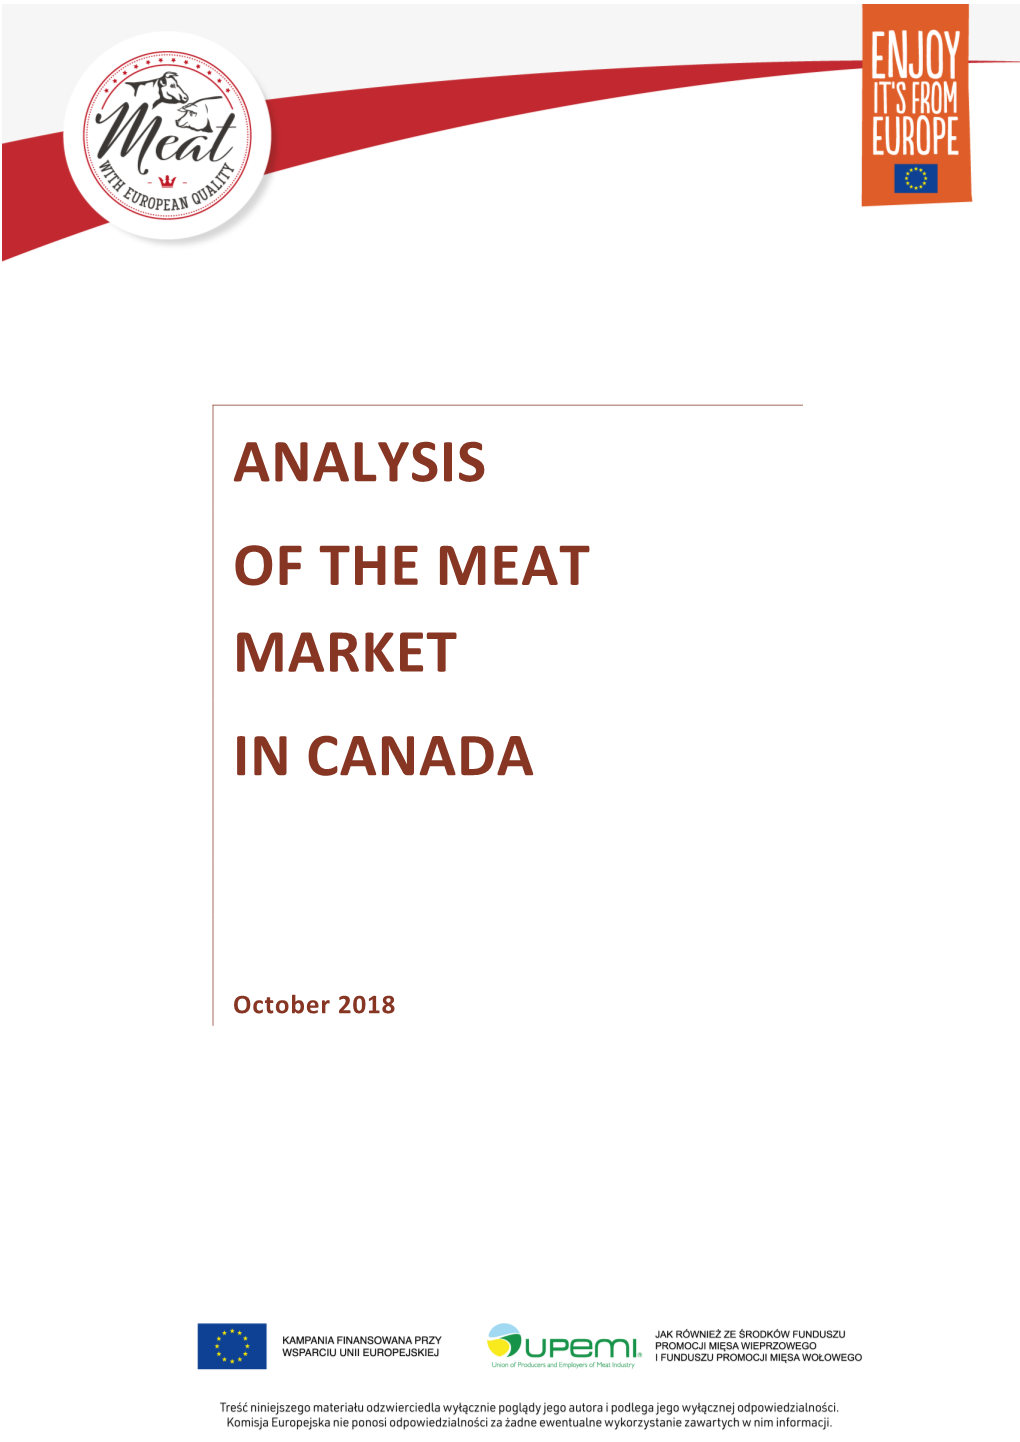 Analysis of the Meat Market in Canada